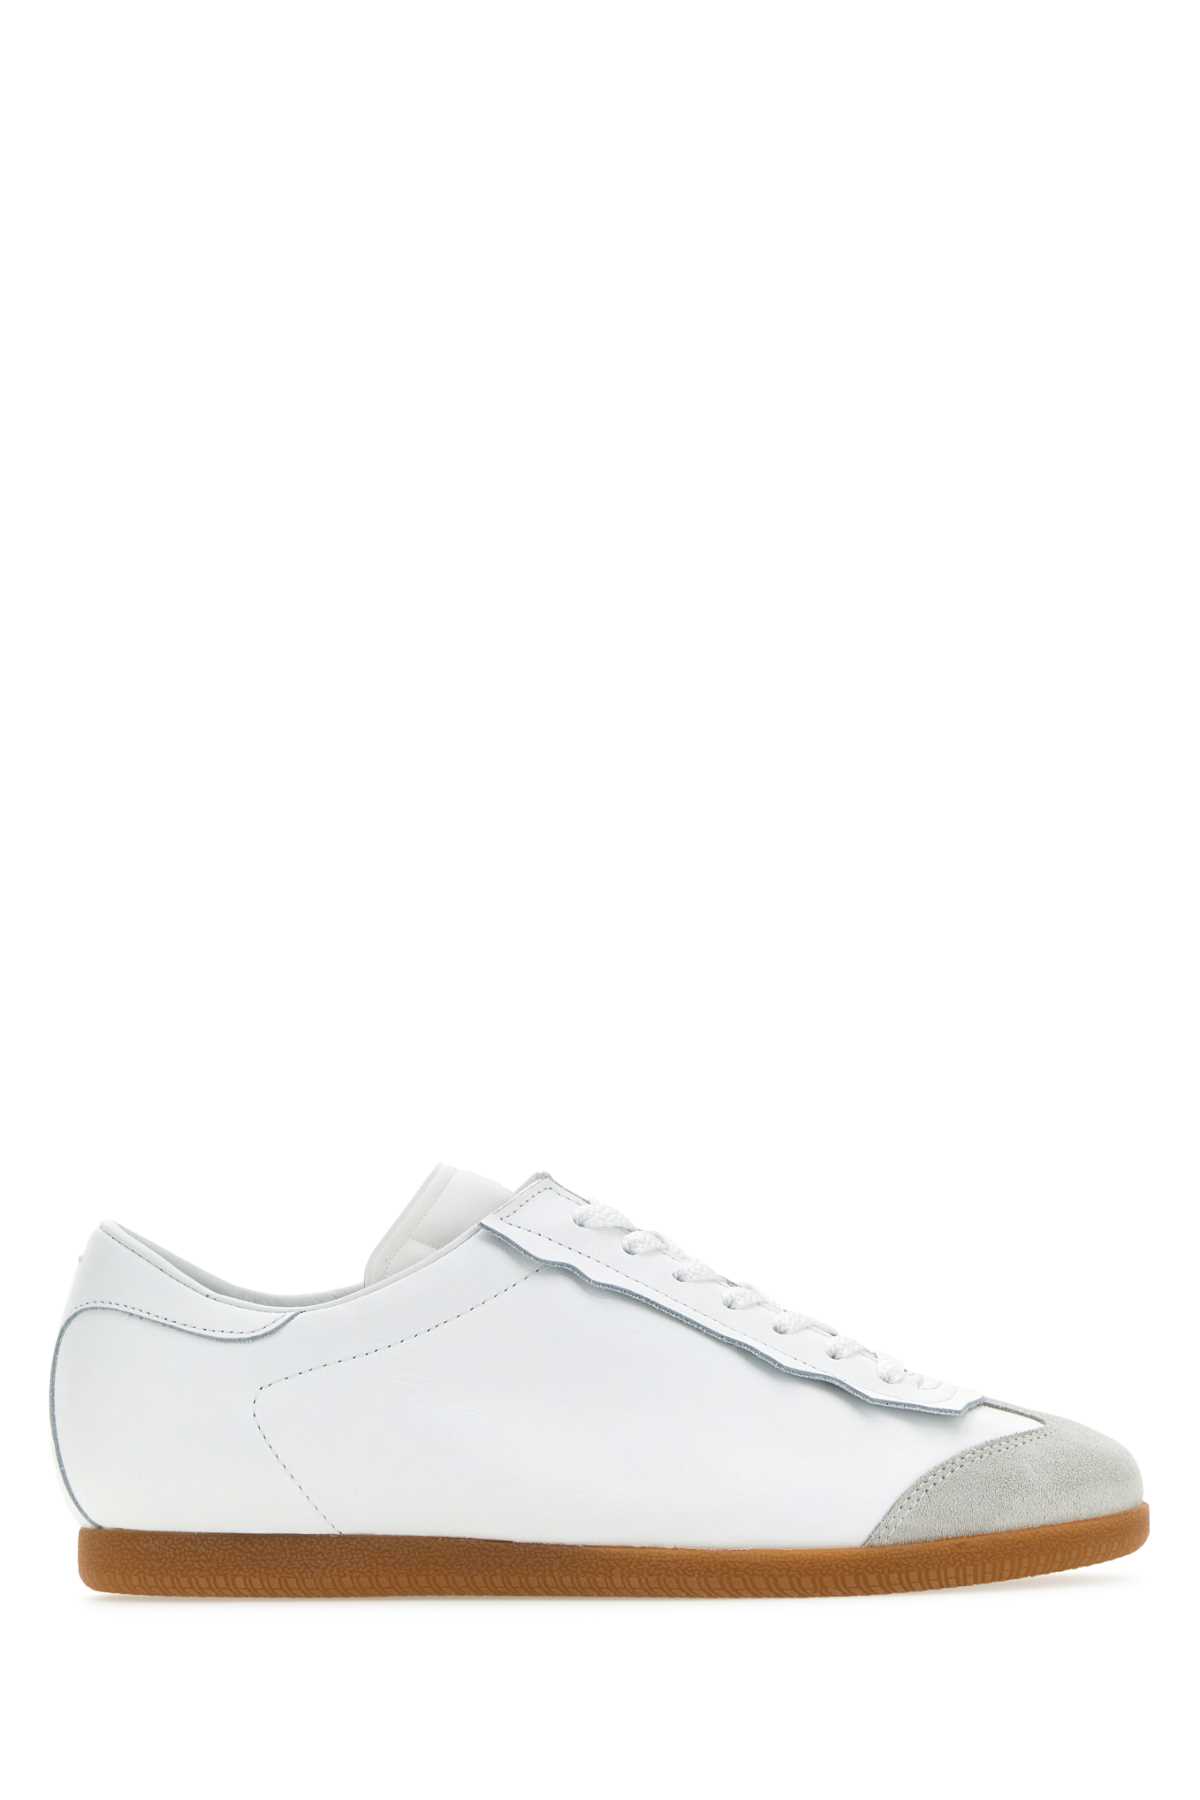 Shop Maison Margiela White Leather Featherlight Sneakers In T1003